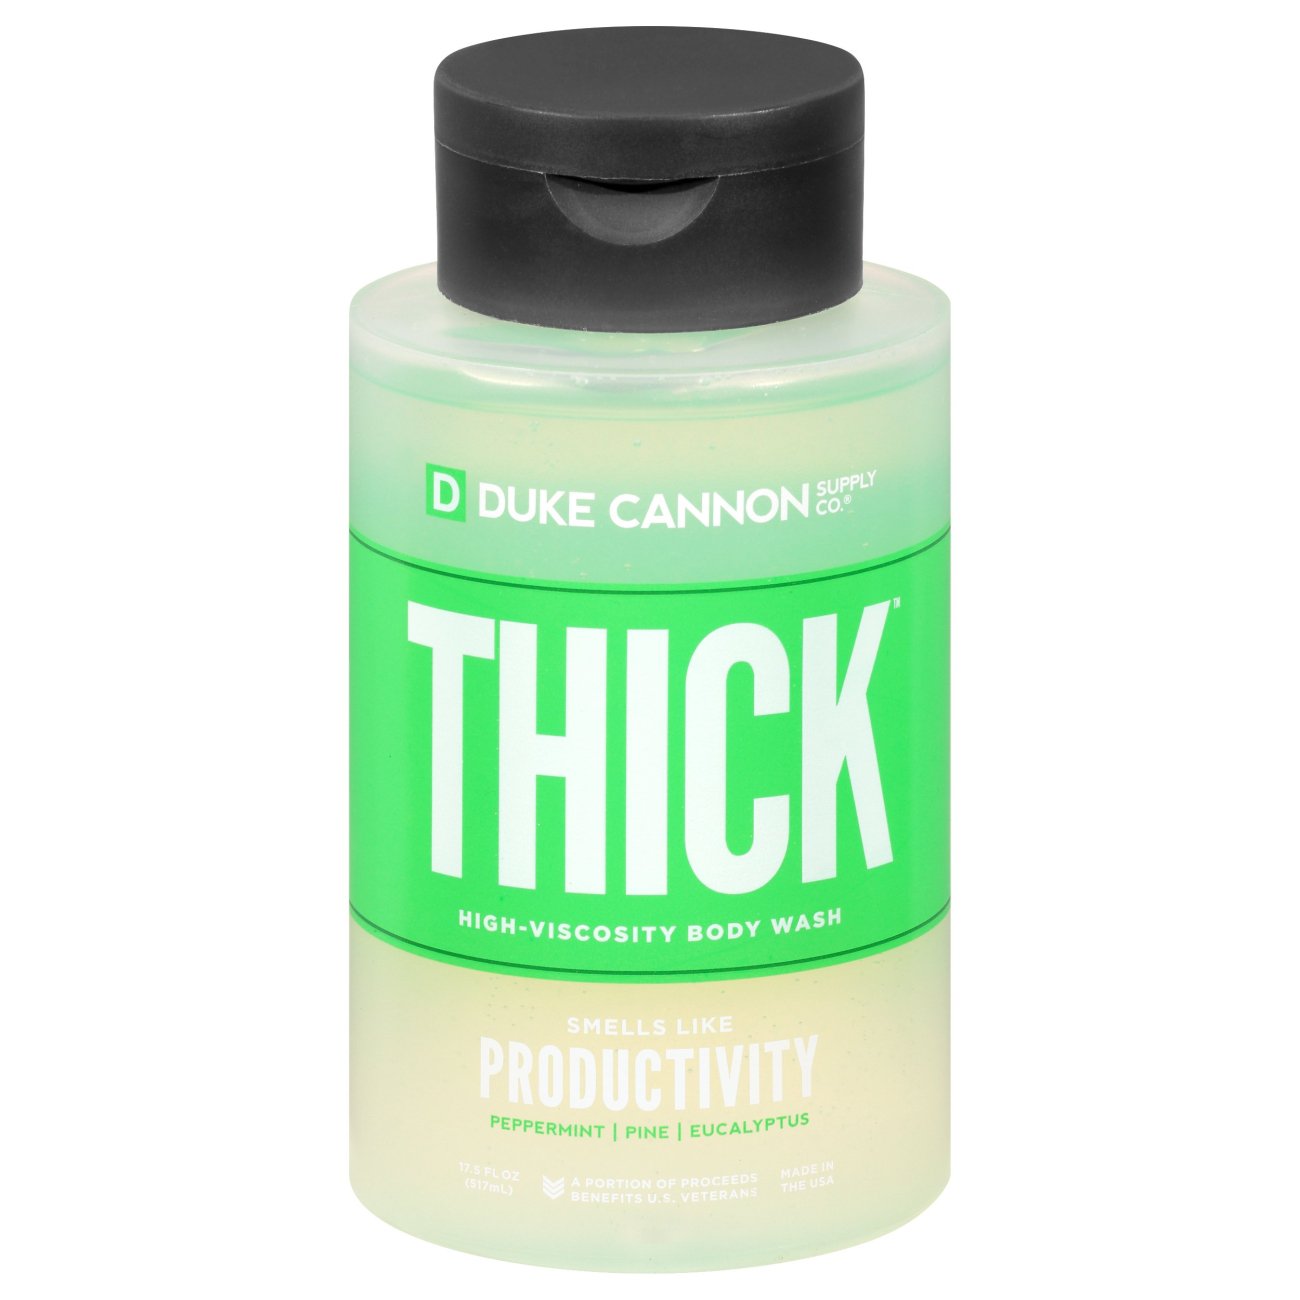 Duke Cannon Thick High Viscosity Body Wash Peppermint Pine And Eucalyptus Shop Body Wash At H E B 